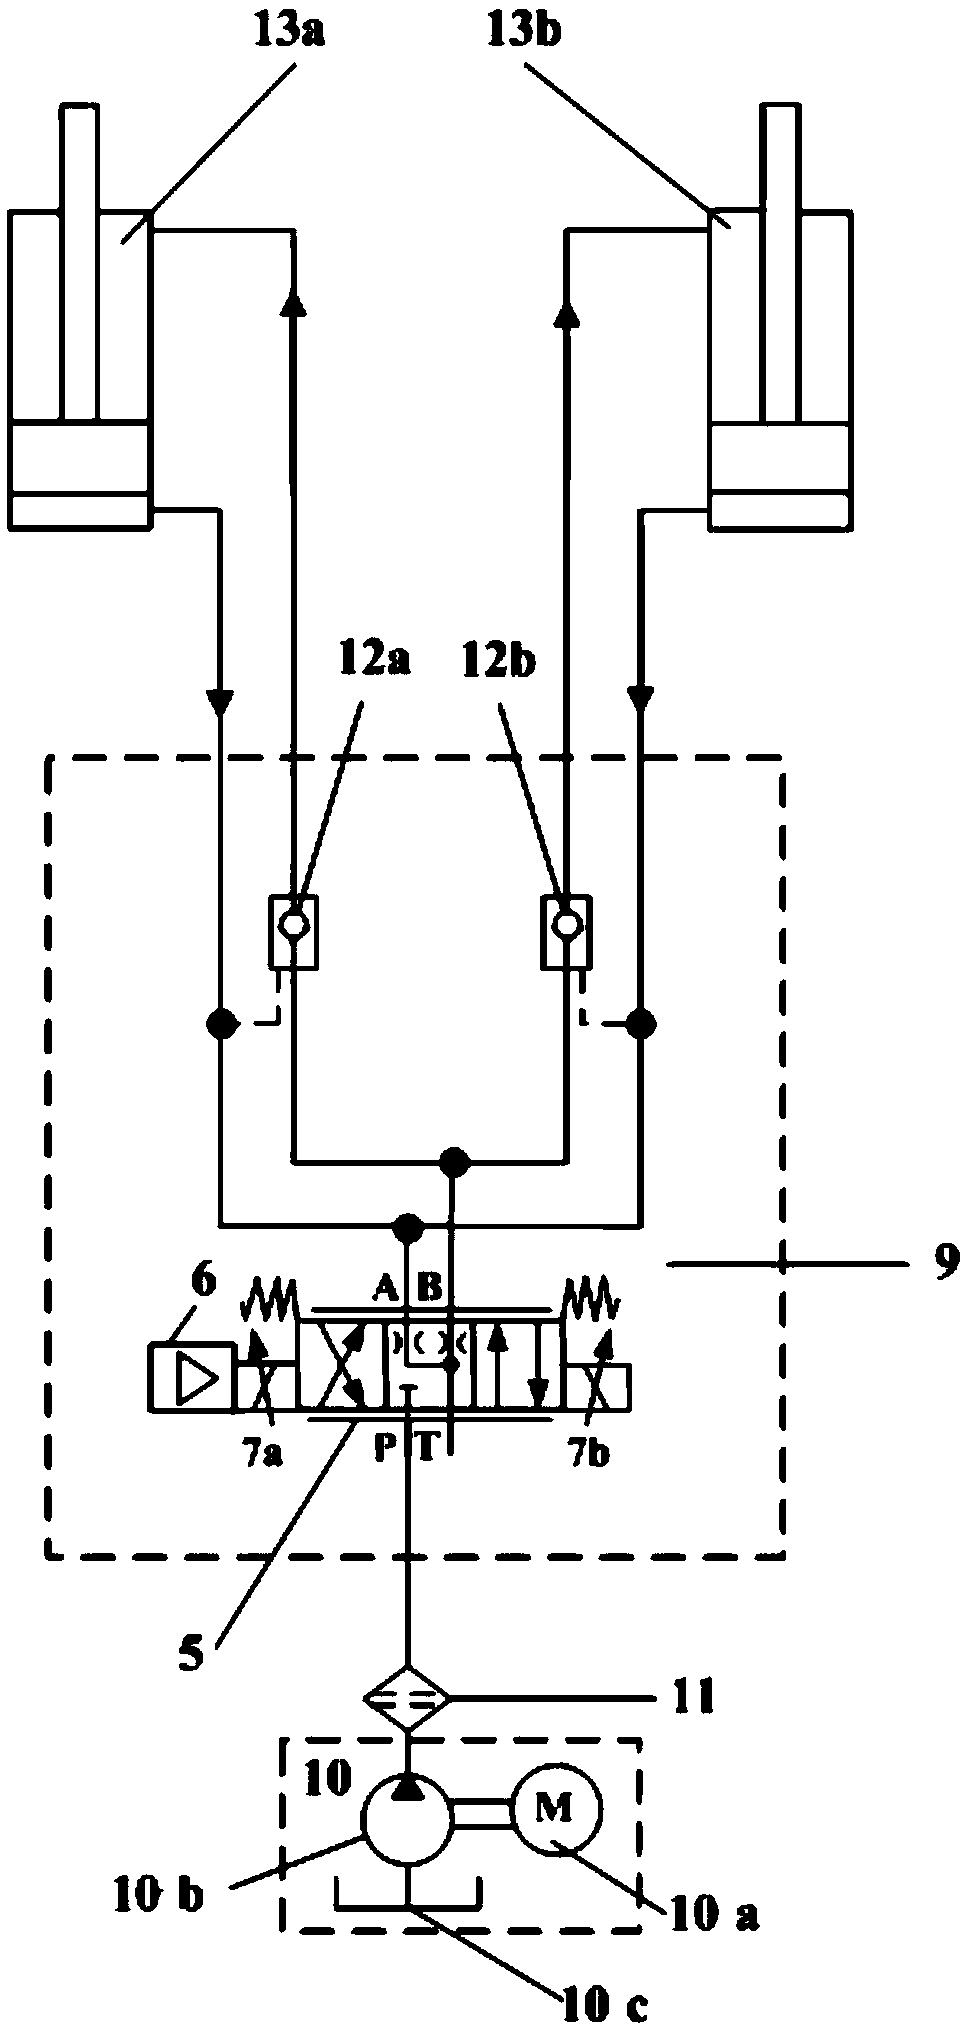 Electro-hydraulic proportion control system of pressure delivery device